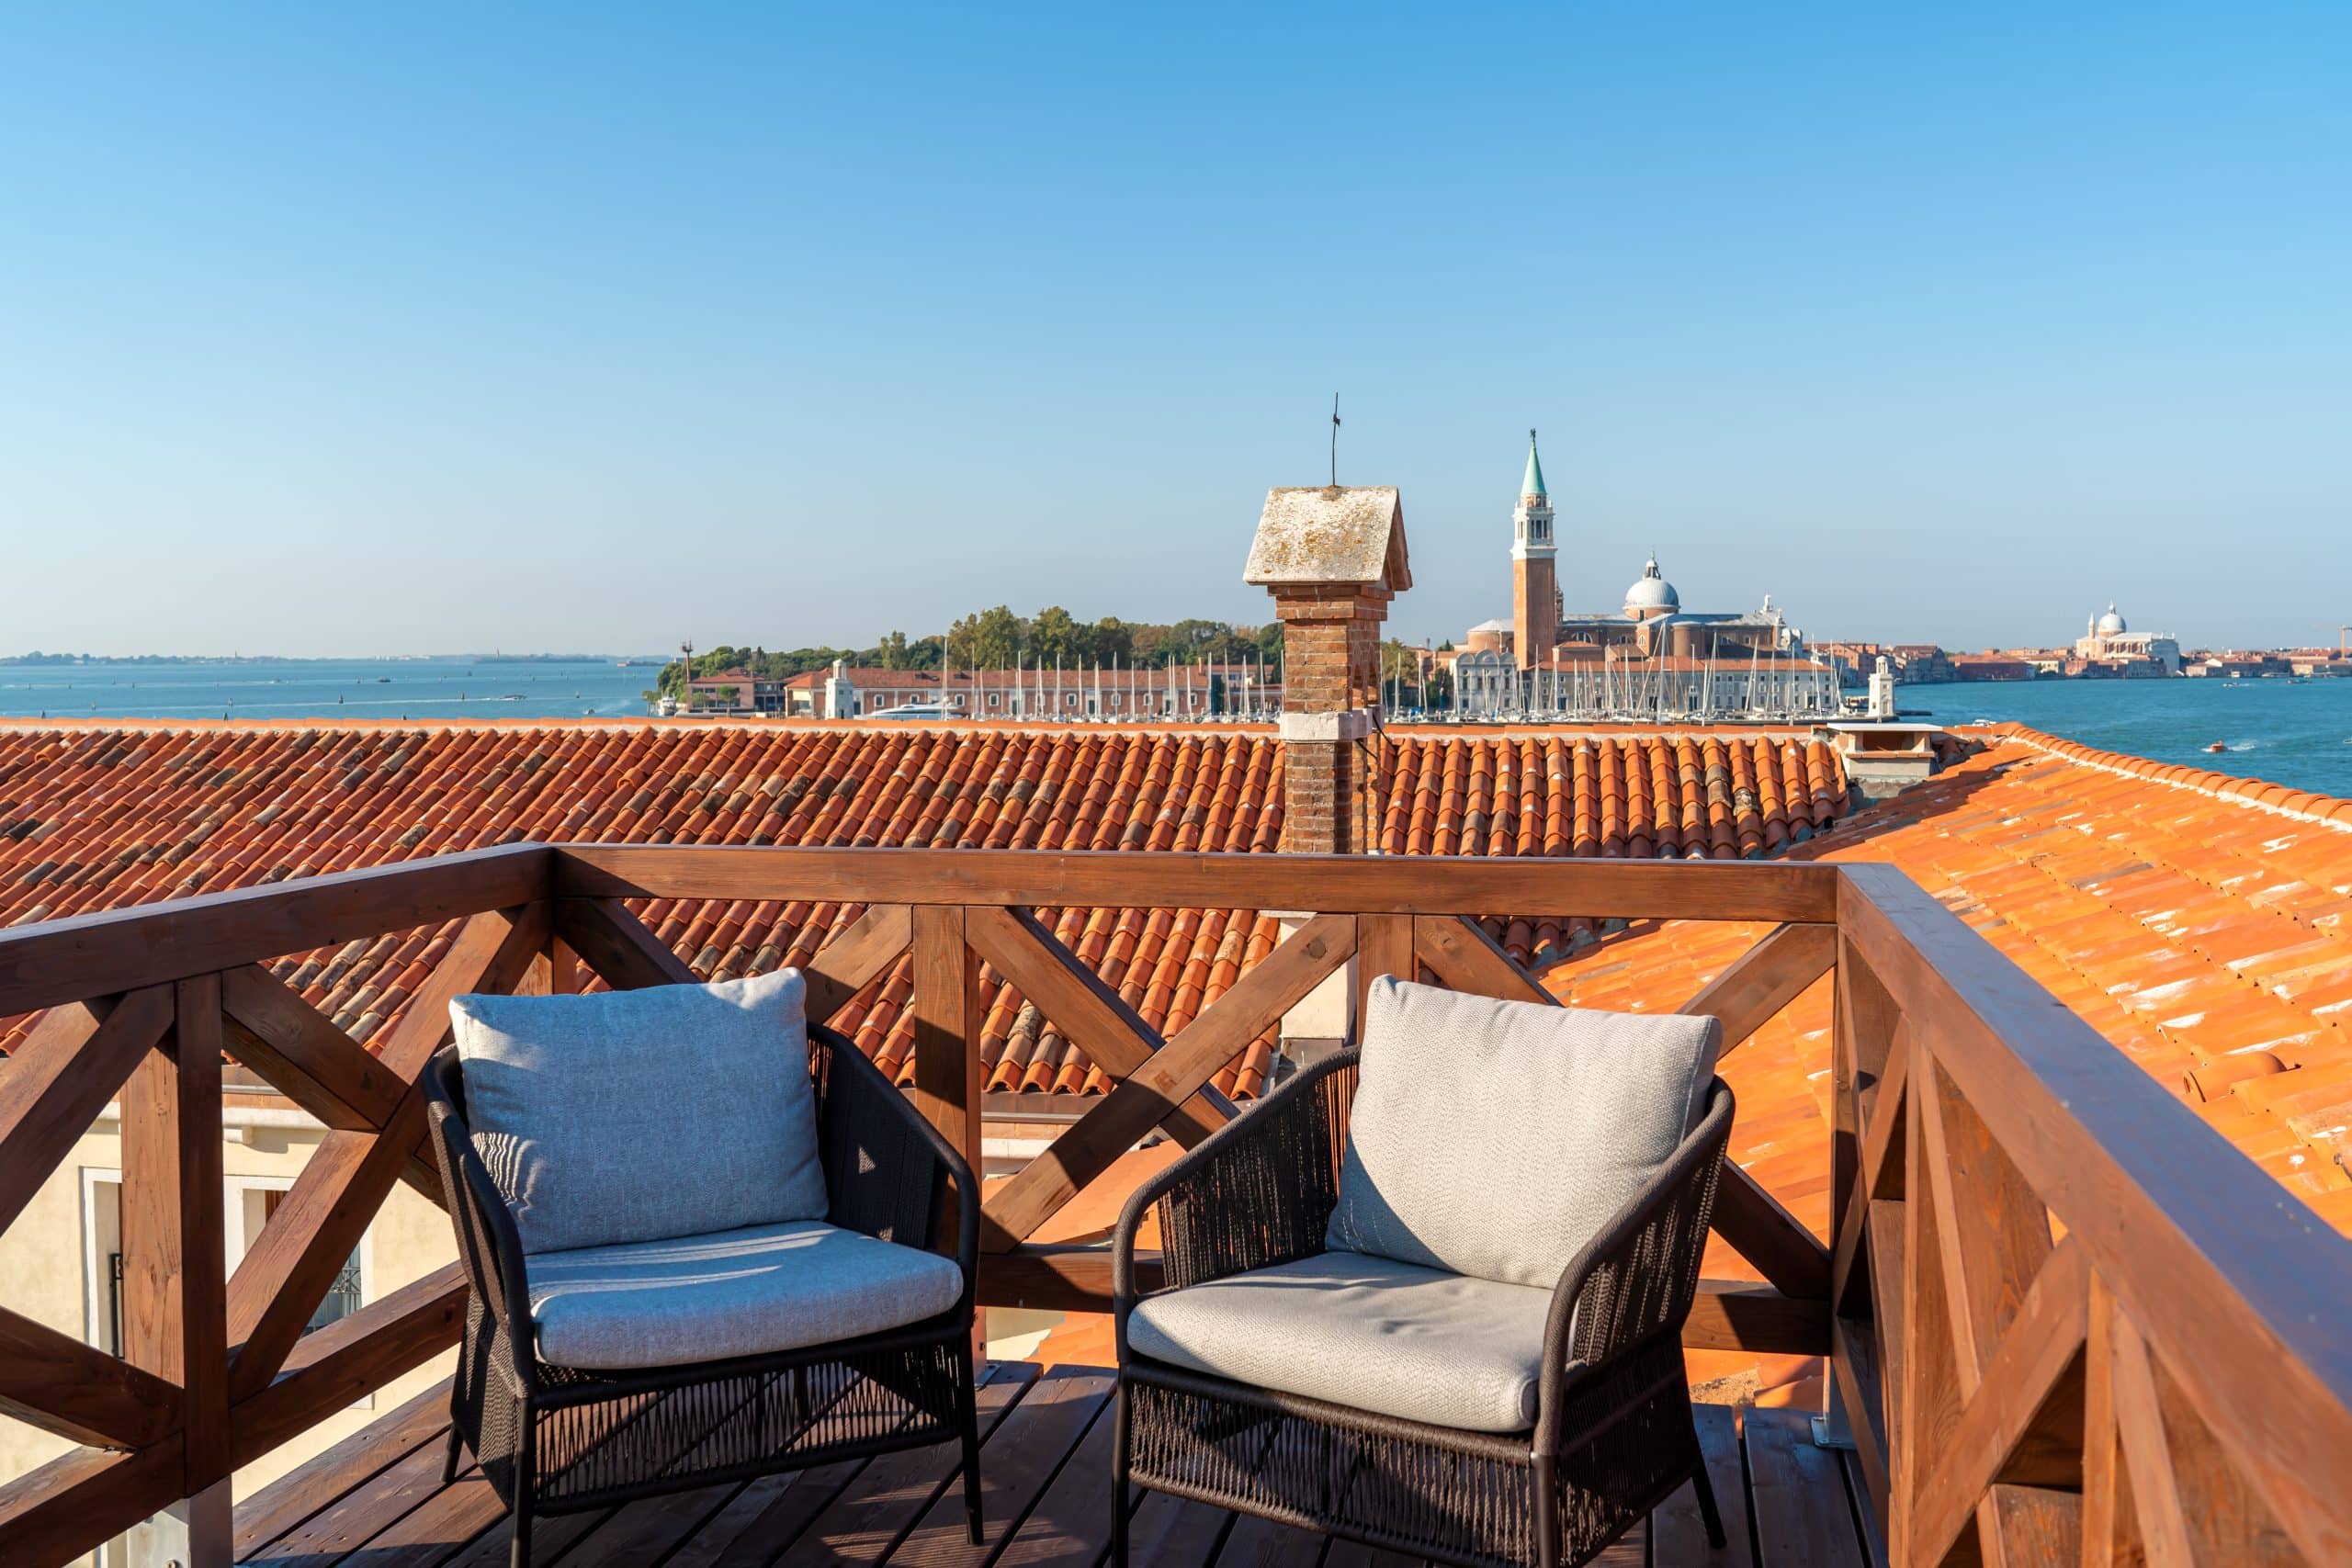 Venice's new Ca' di Dio hotel roof terrace of Altana Suite with view of San Maggiore monastery on its island across the Grand Canal. 